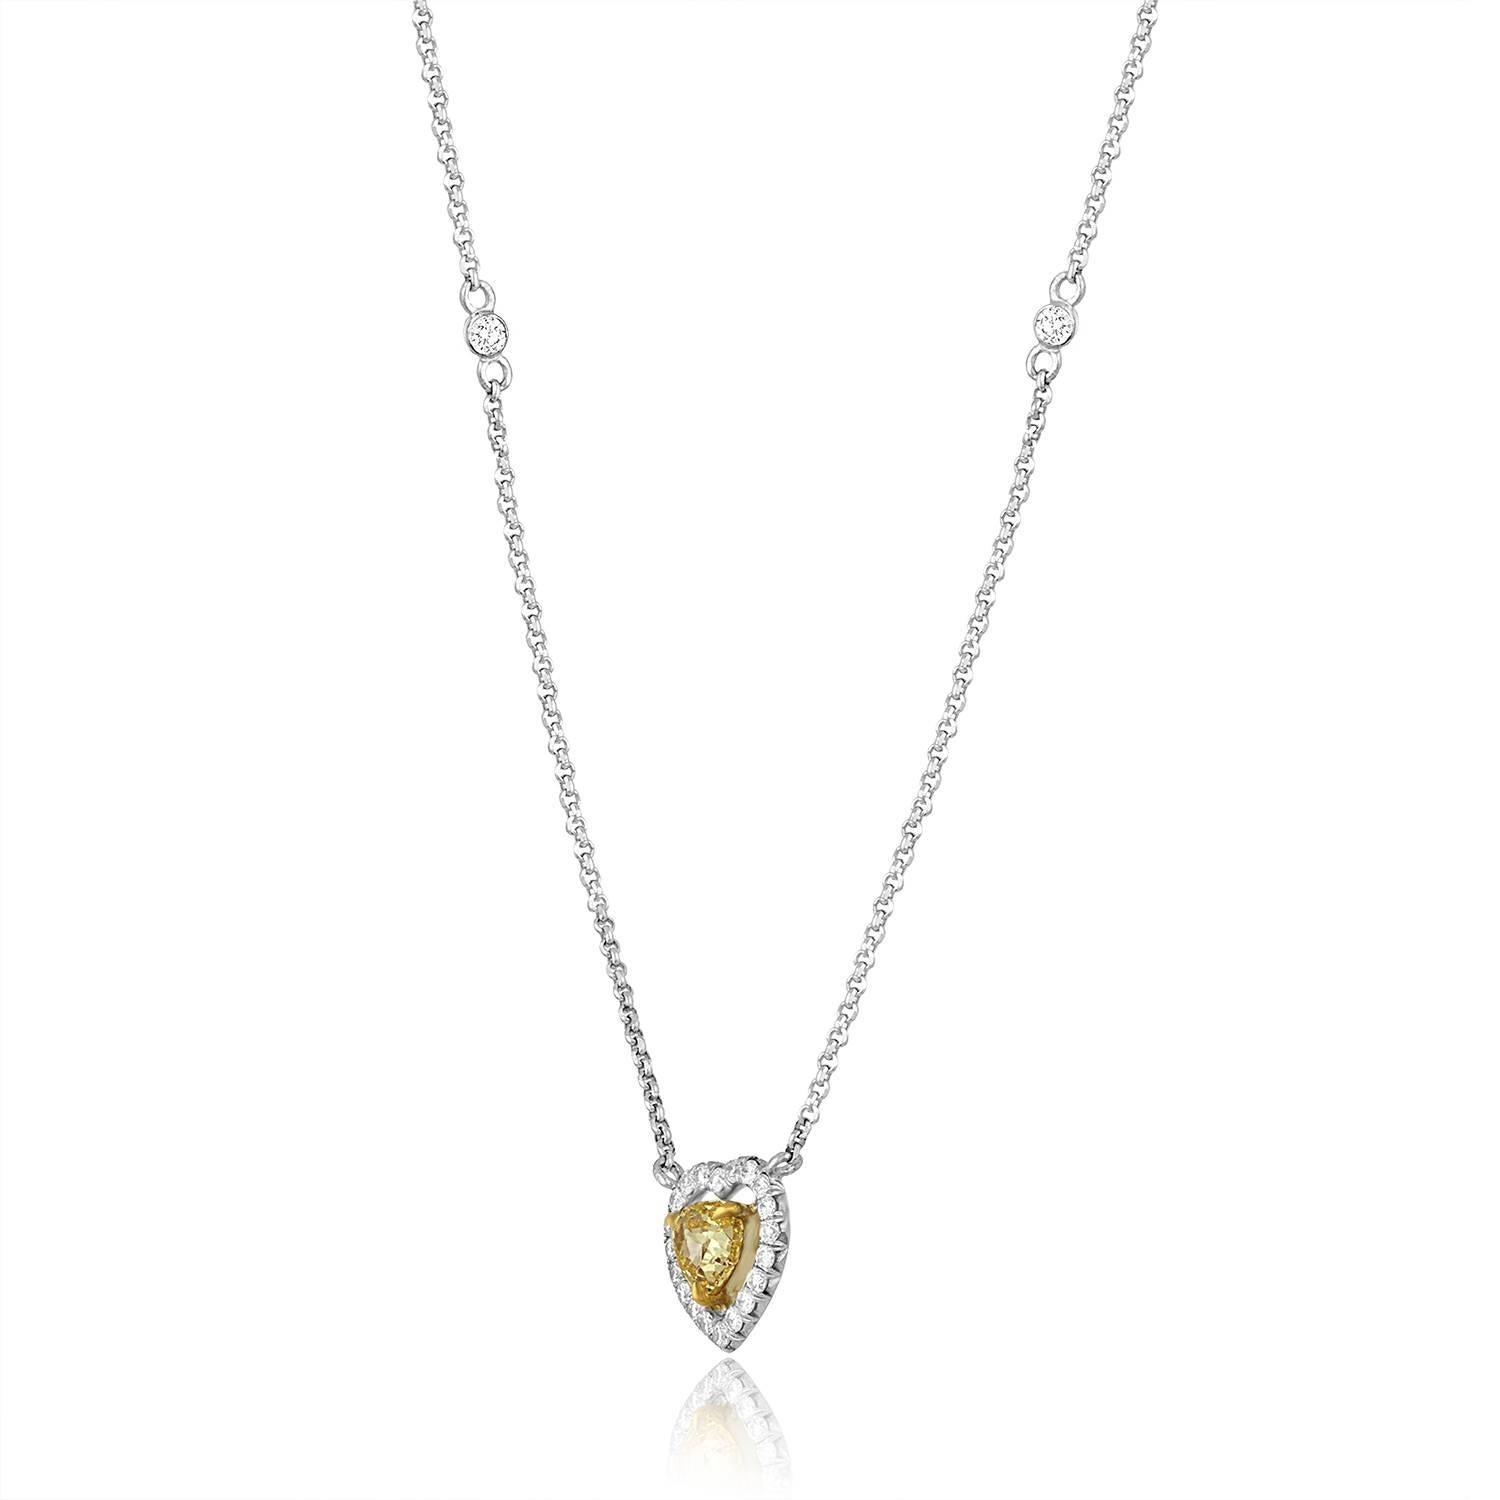 Beautiful Fancy Yellow Necklace
The Halo Necklace is 18K White & Yellow Gold
The Fancy Yellow Heart is 0.48 Carats VS Clarity
There are 0.24 Carats In Diamonds G VS
The halo pendant is about 9mm x 10mm.
The necklace is 16.75